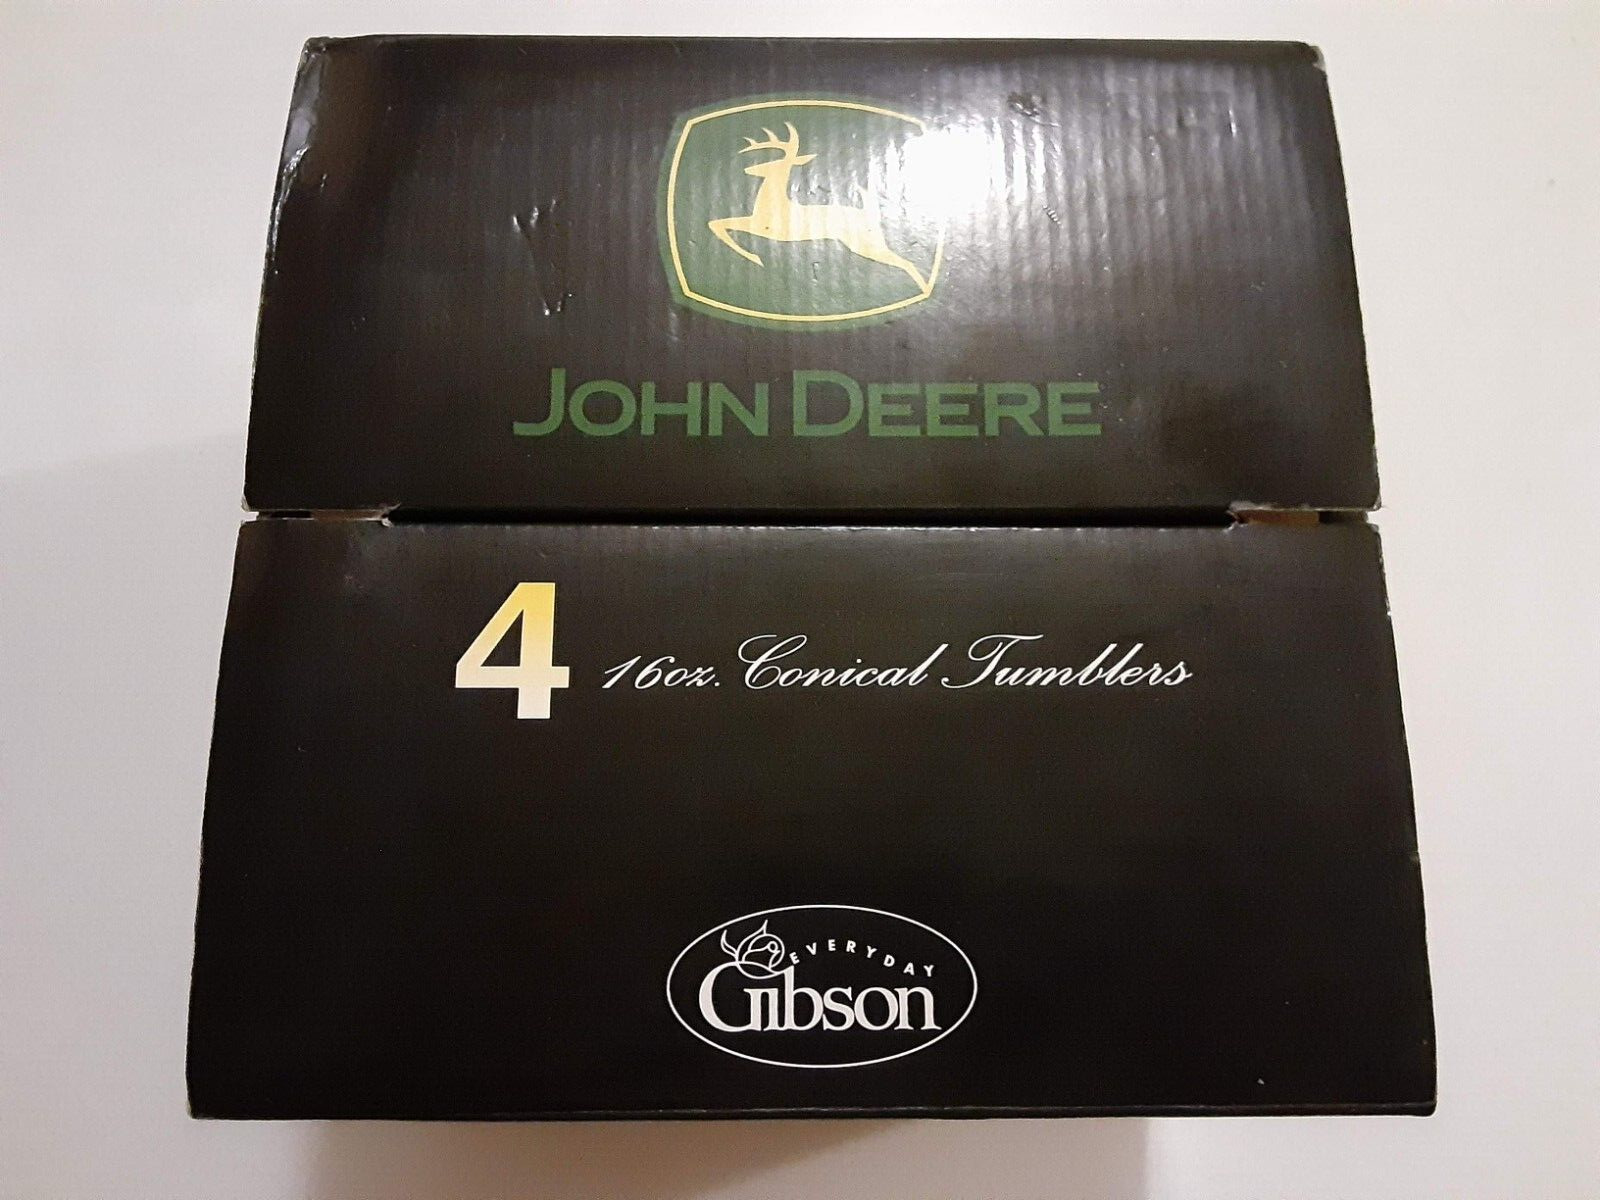 Everyday Gibson JOHN DEERE Conical Tumblers/Glasses 16 Oz. SET OF 4 in BOX